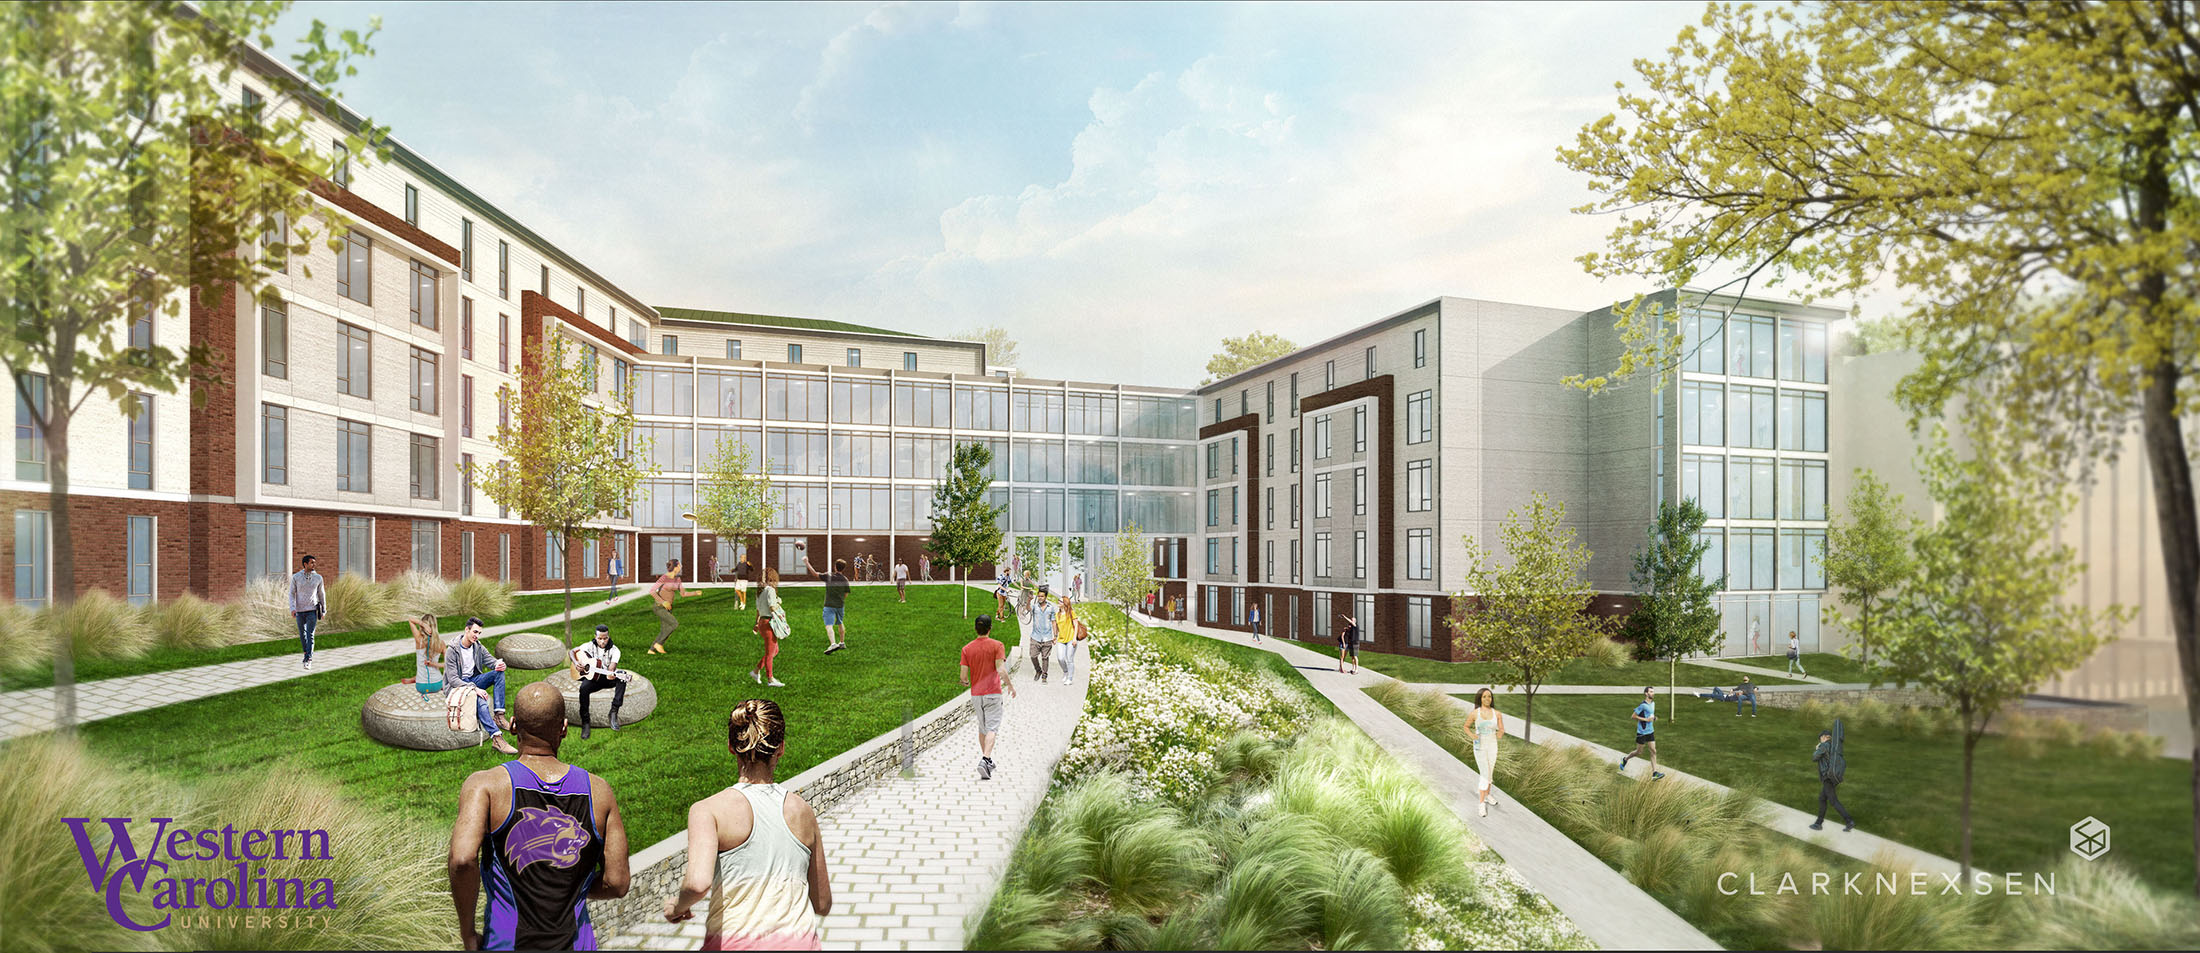 Board endorses design concept for campus residence hall - WCU News